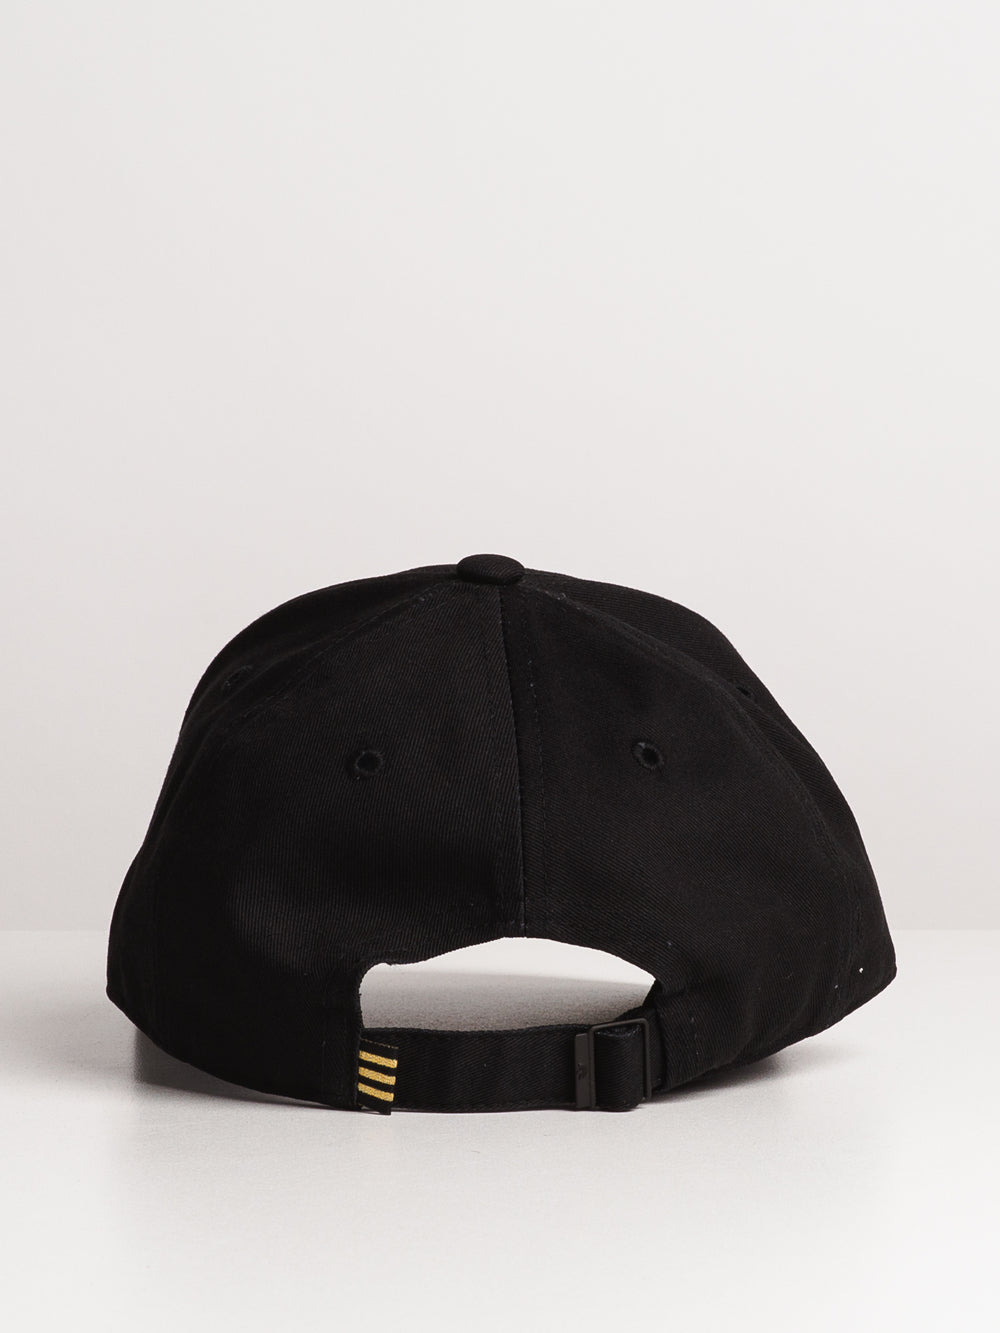 AC GOLD BB HAT - BLACK/GOLD - CLEARANCE